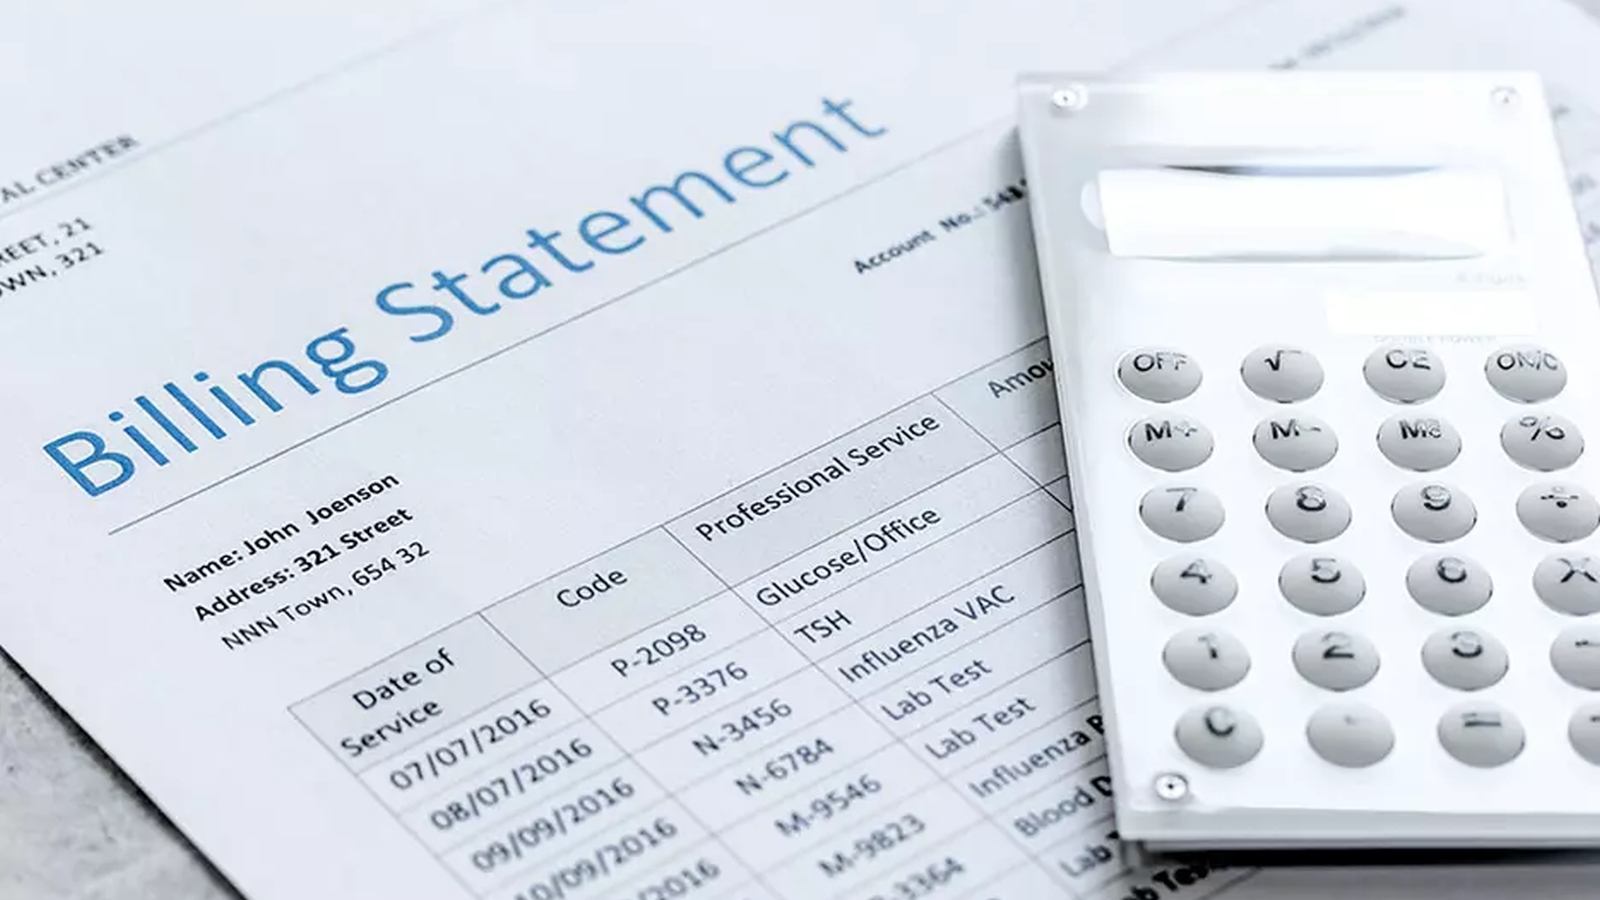 Printed billing statement and calculator on a table top